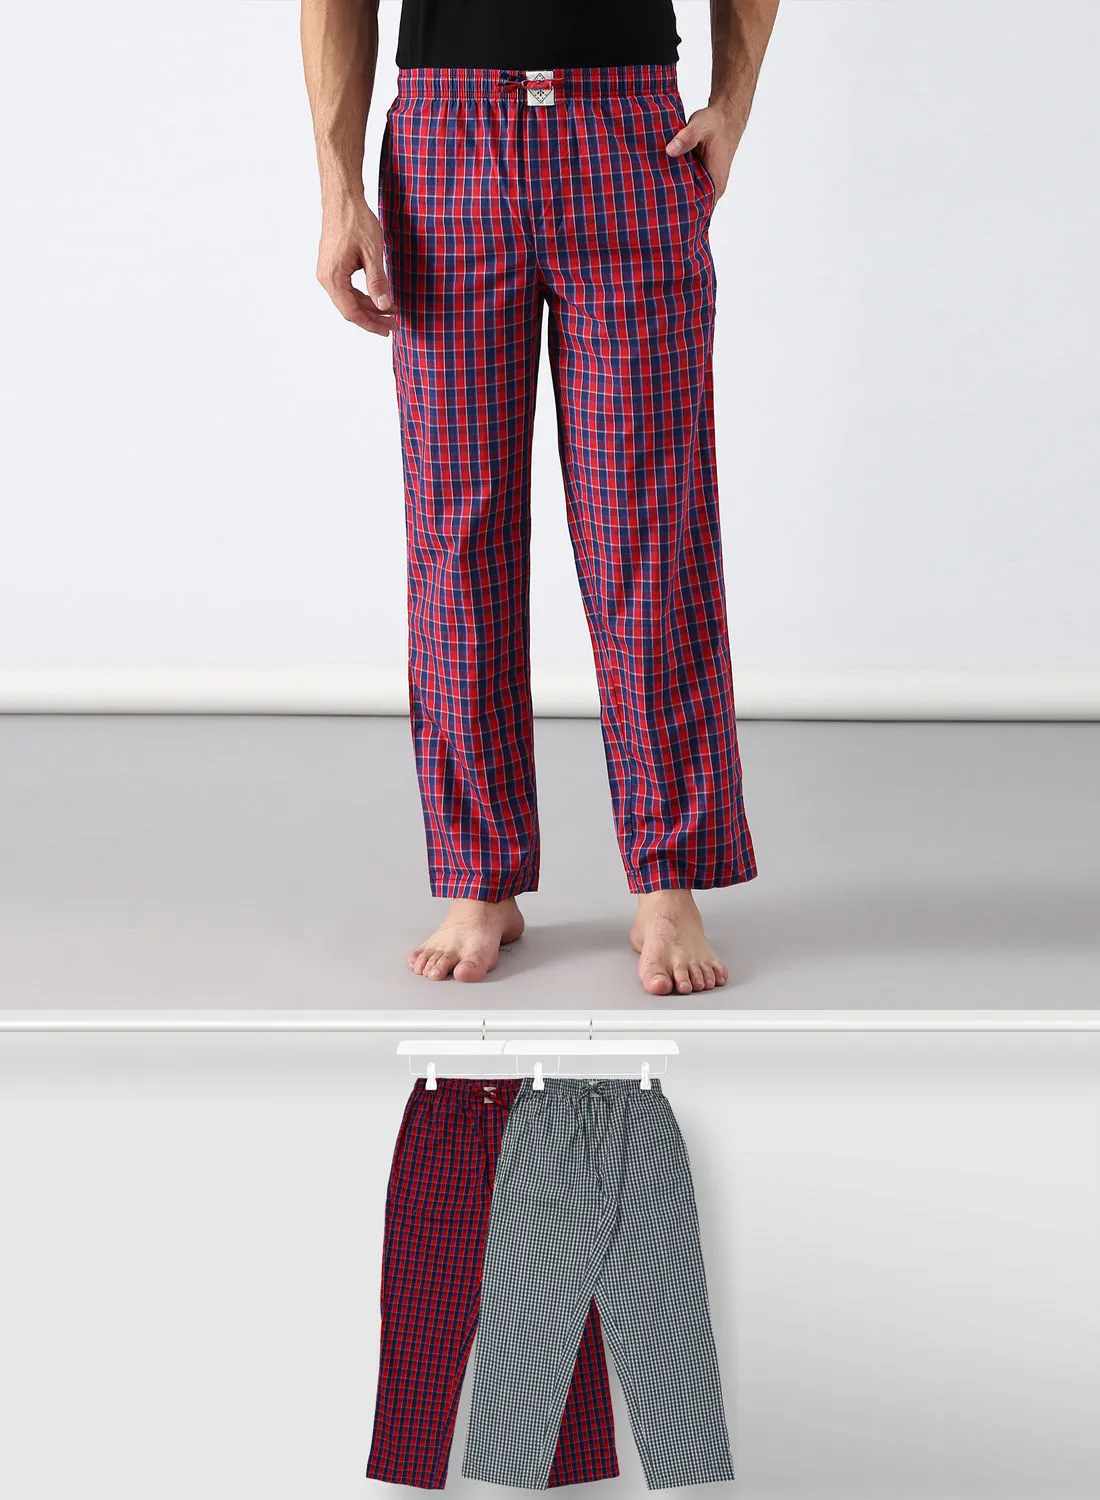 ABOF 2 Pack Lounge Pants Sets Red/Grey